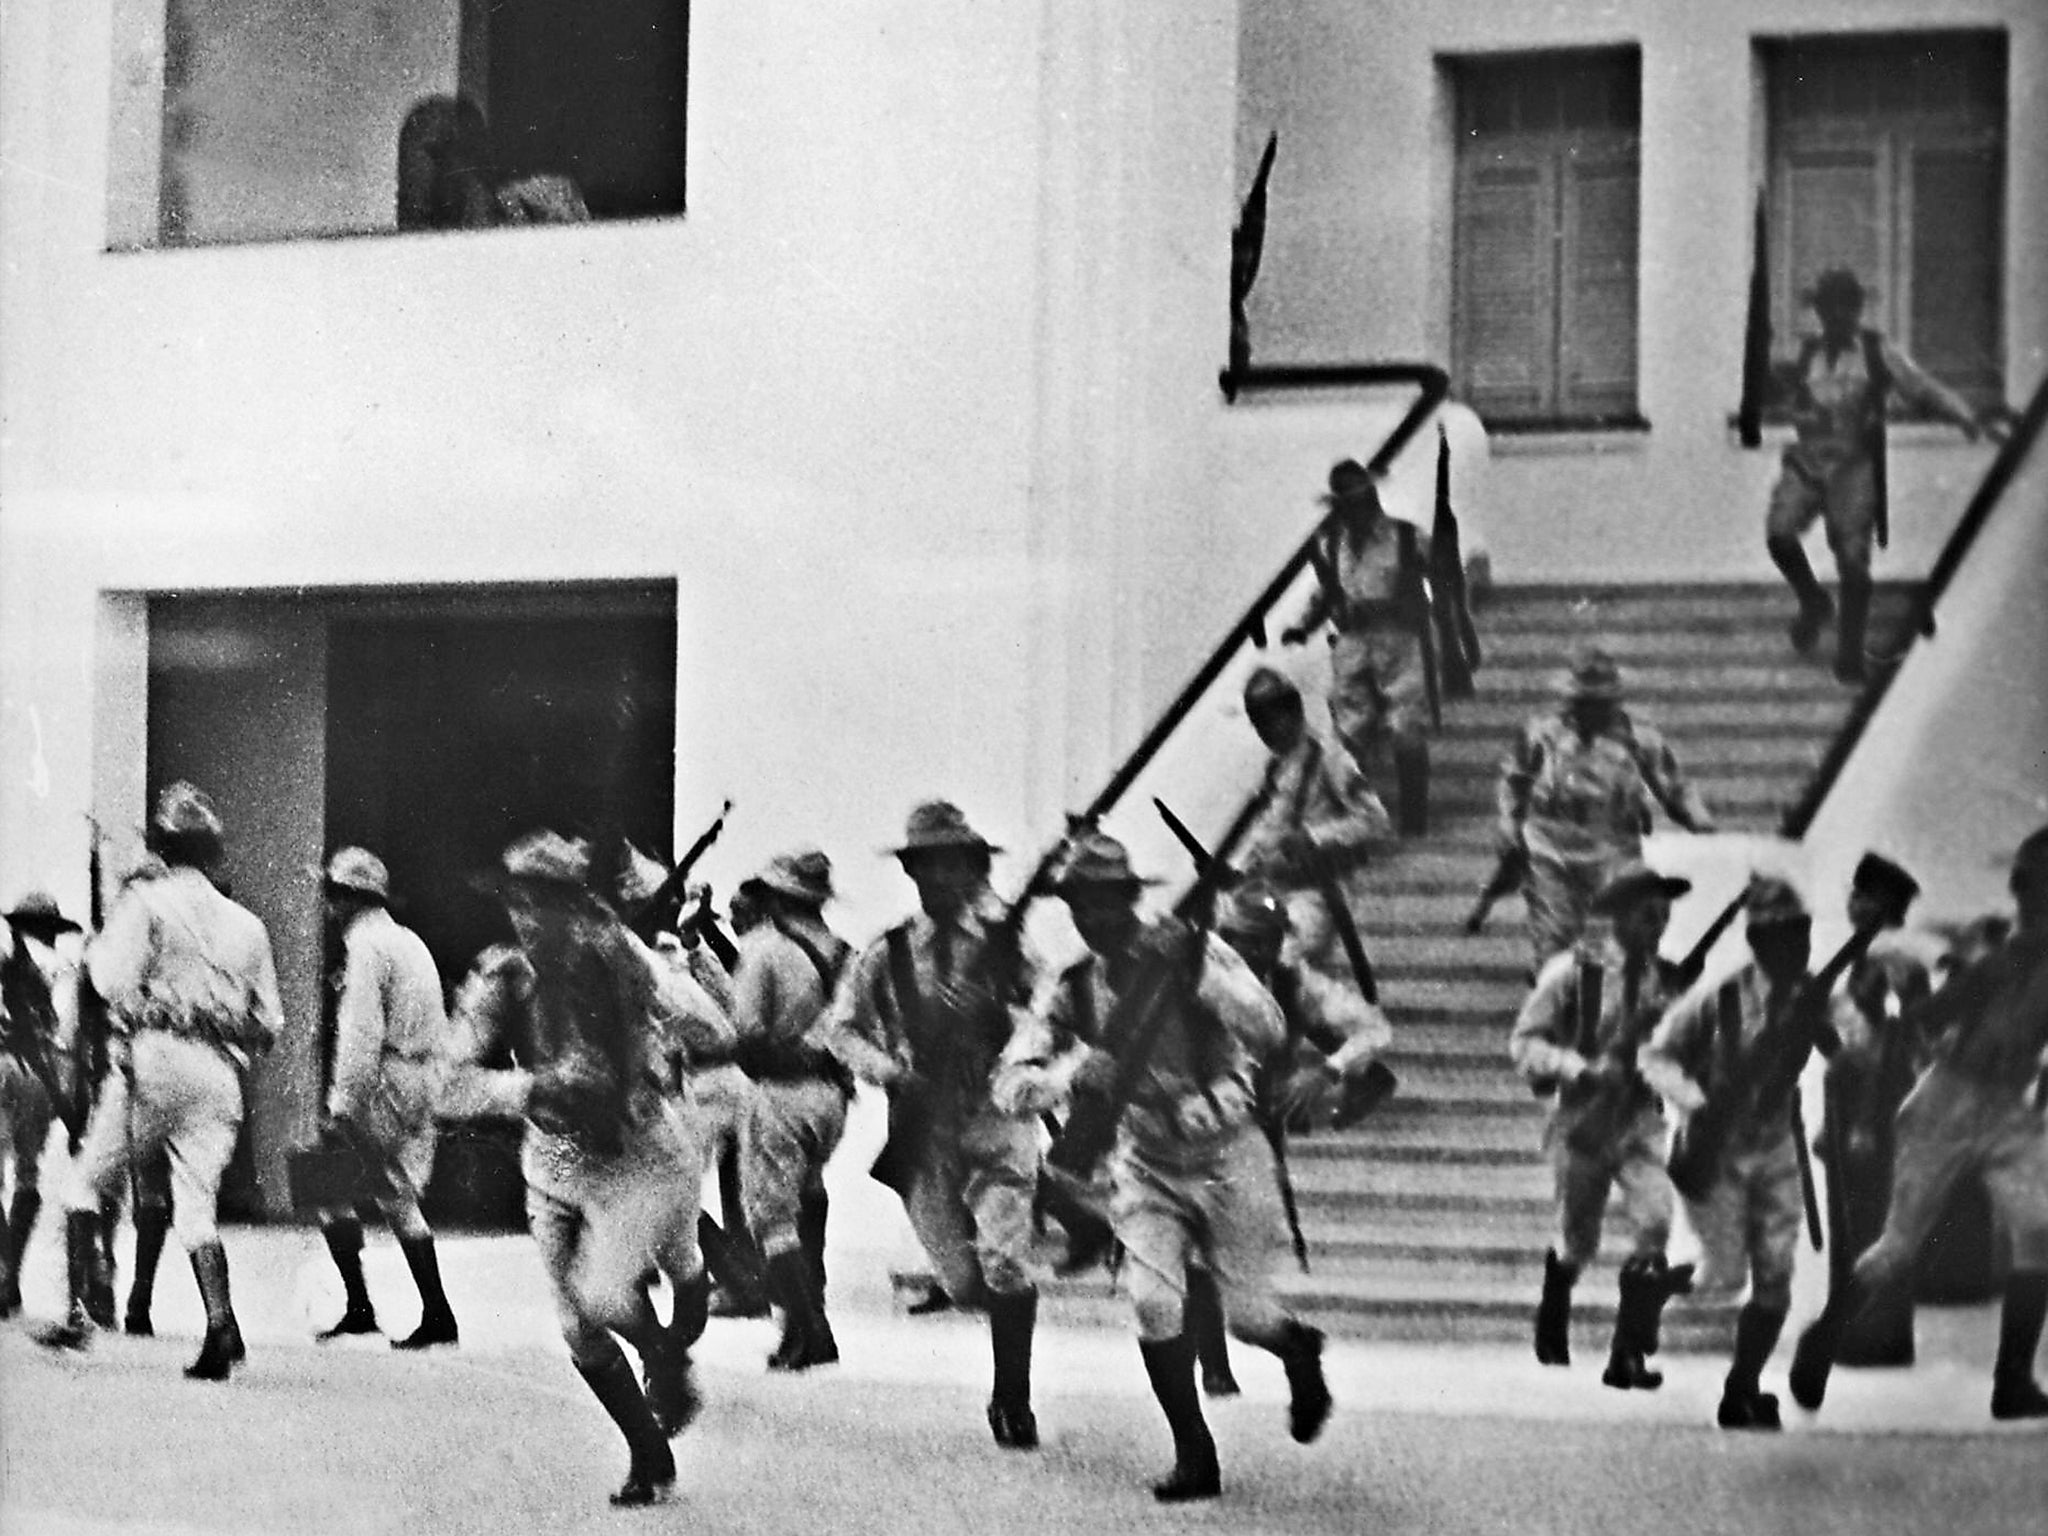 Members of Batista's army ready to go into action, after the attack on the Moncada garrison in 1953